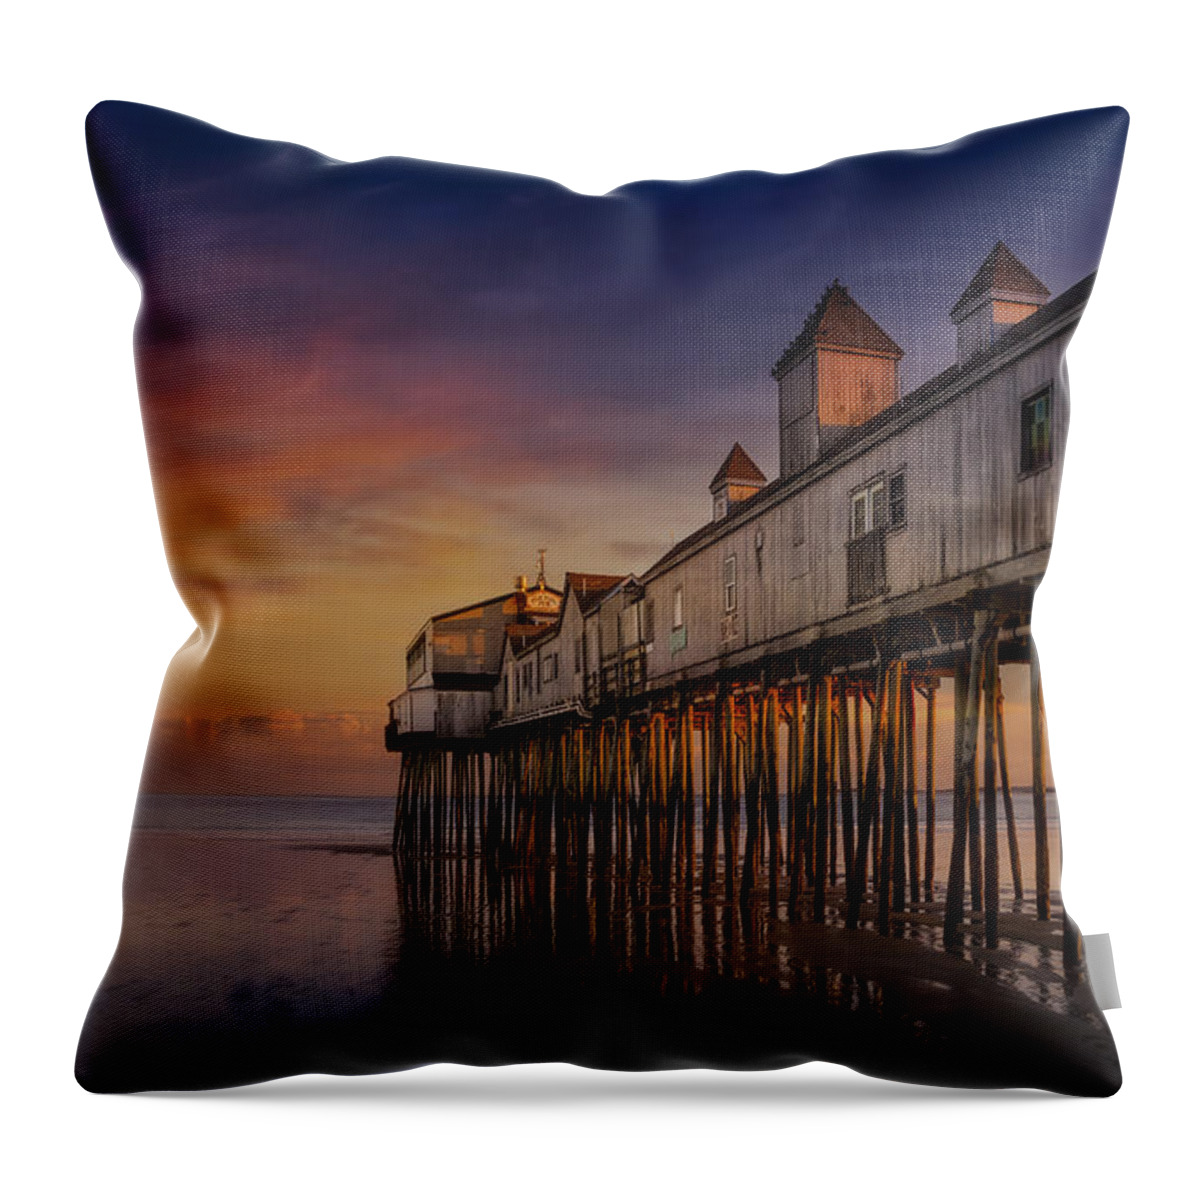 Old Orchard Beach Throw Pillow featuring the photograph Old Orchard Beach Pier Sunset by Susan Candelario